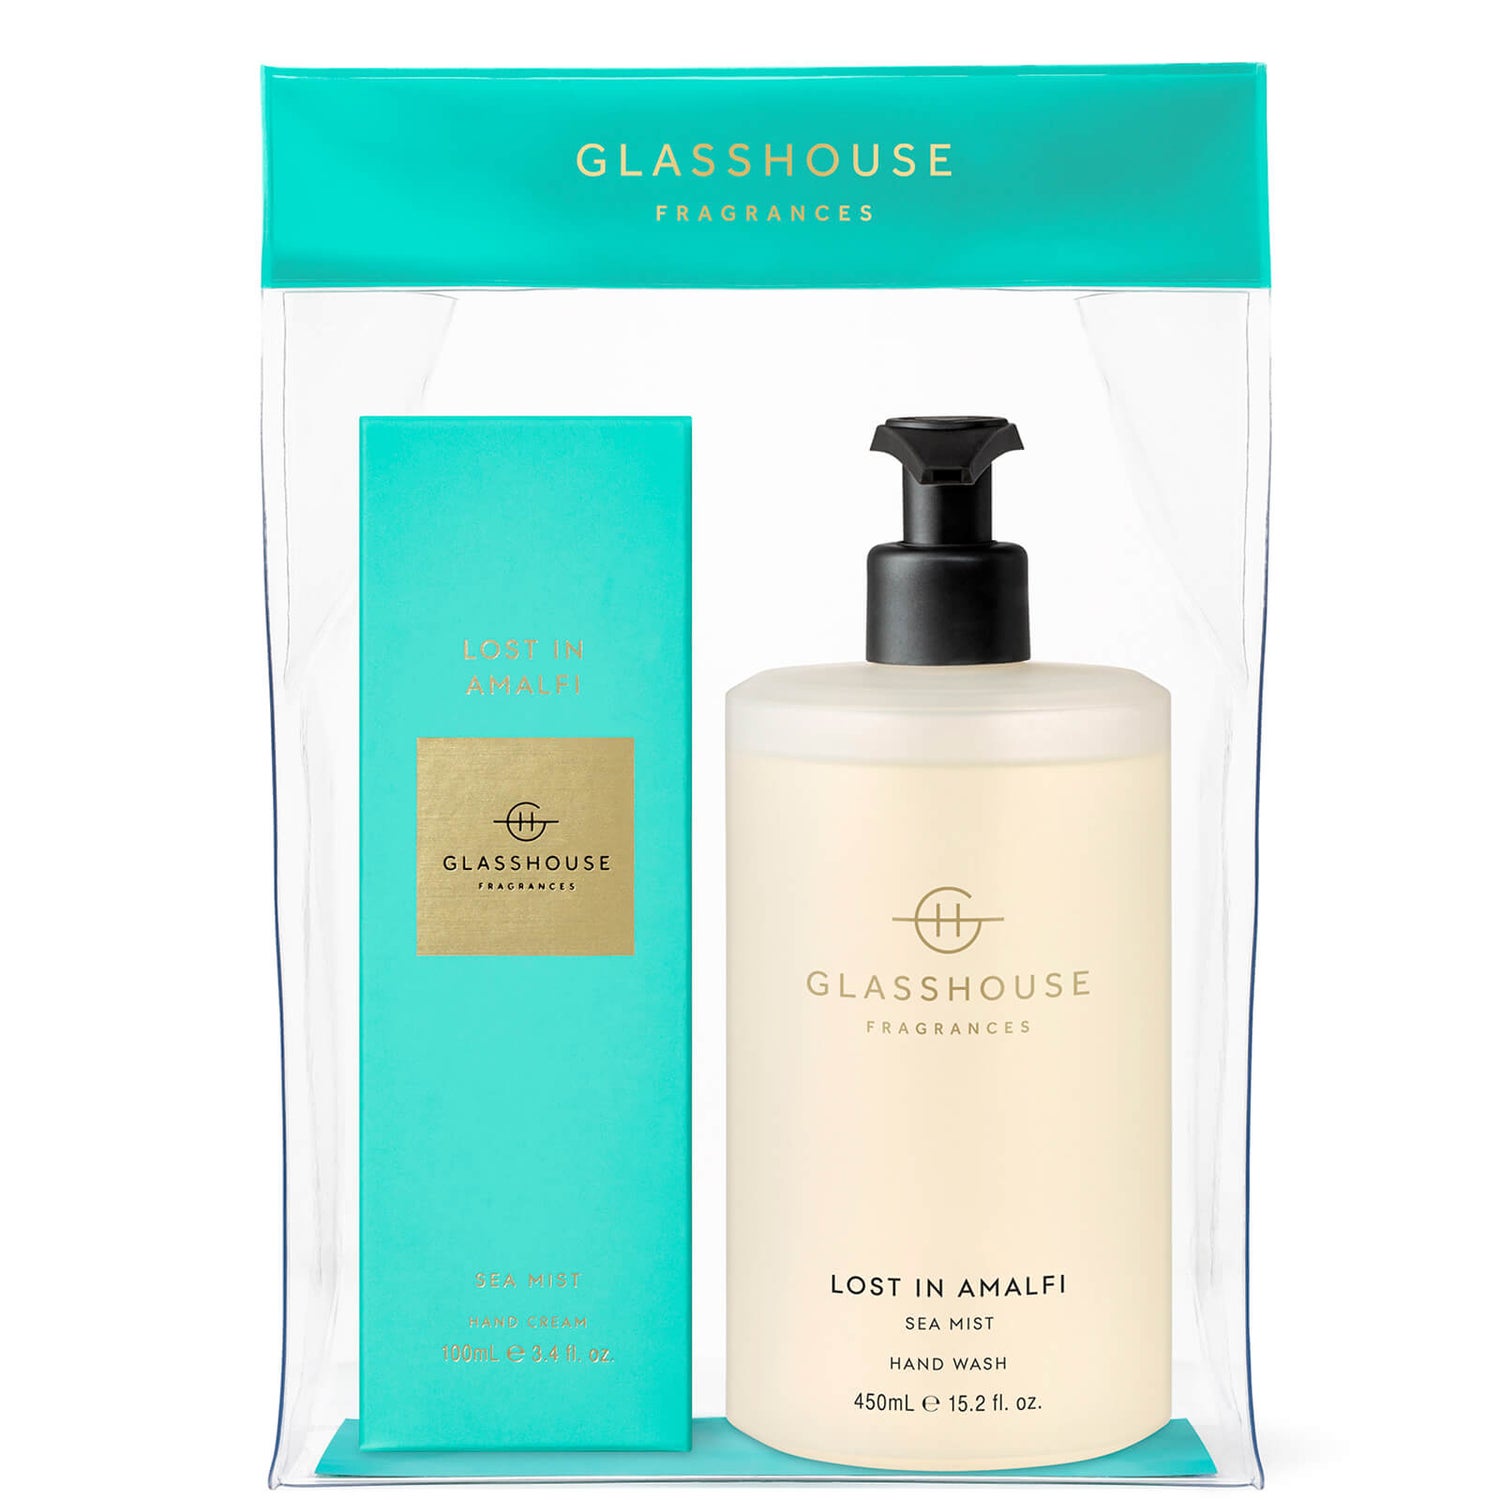 Glasshouse Fragrances Lost in Amalfi Hand Duo